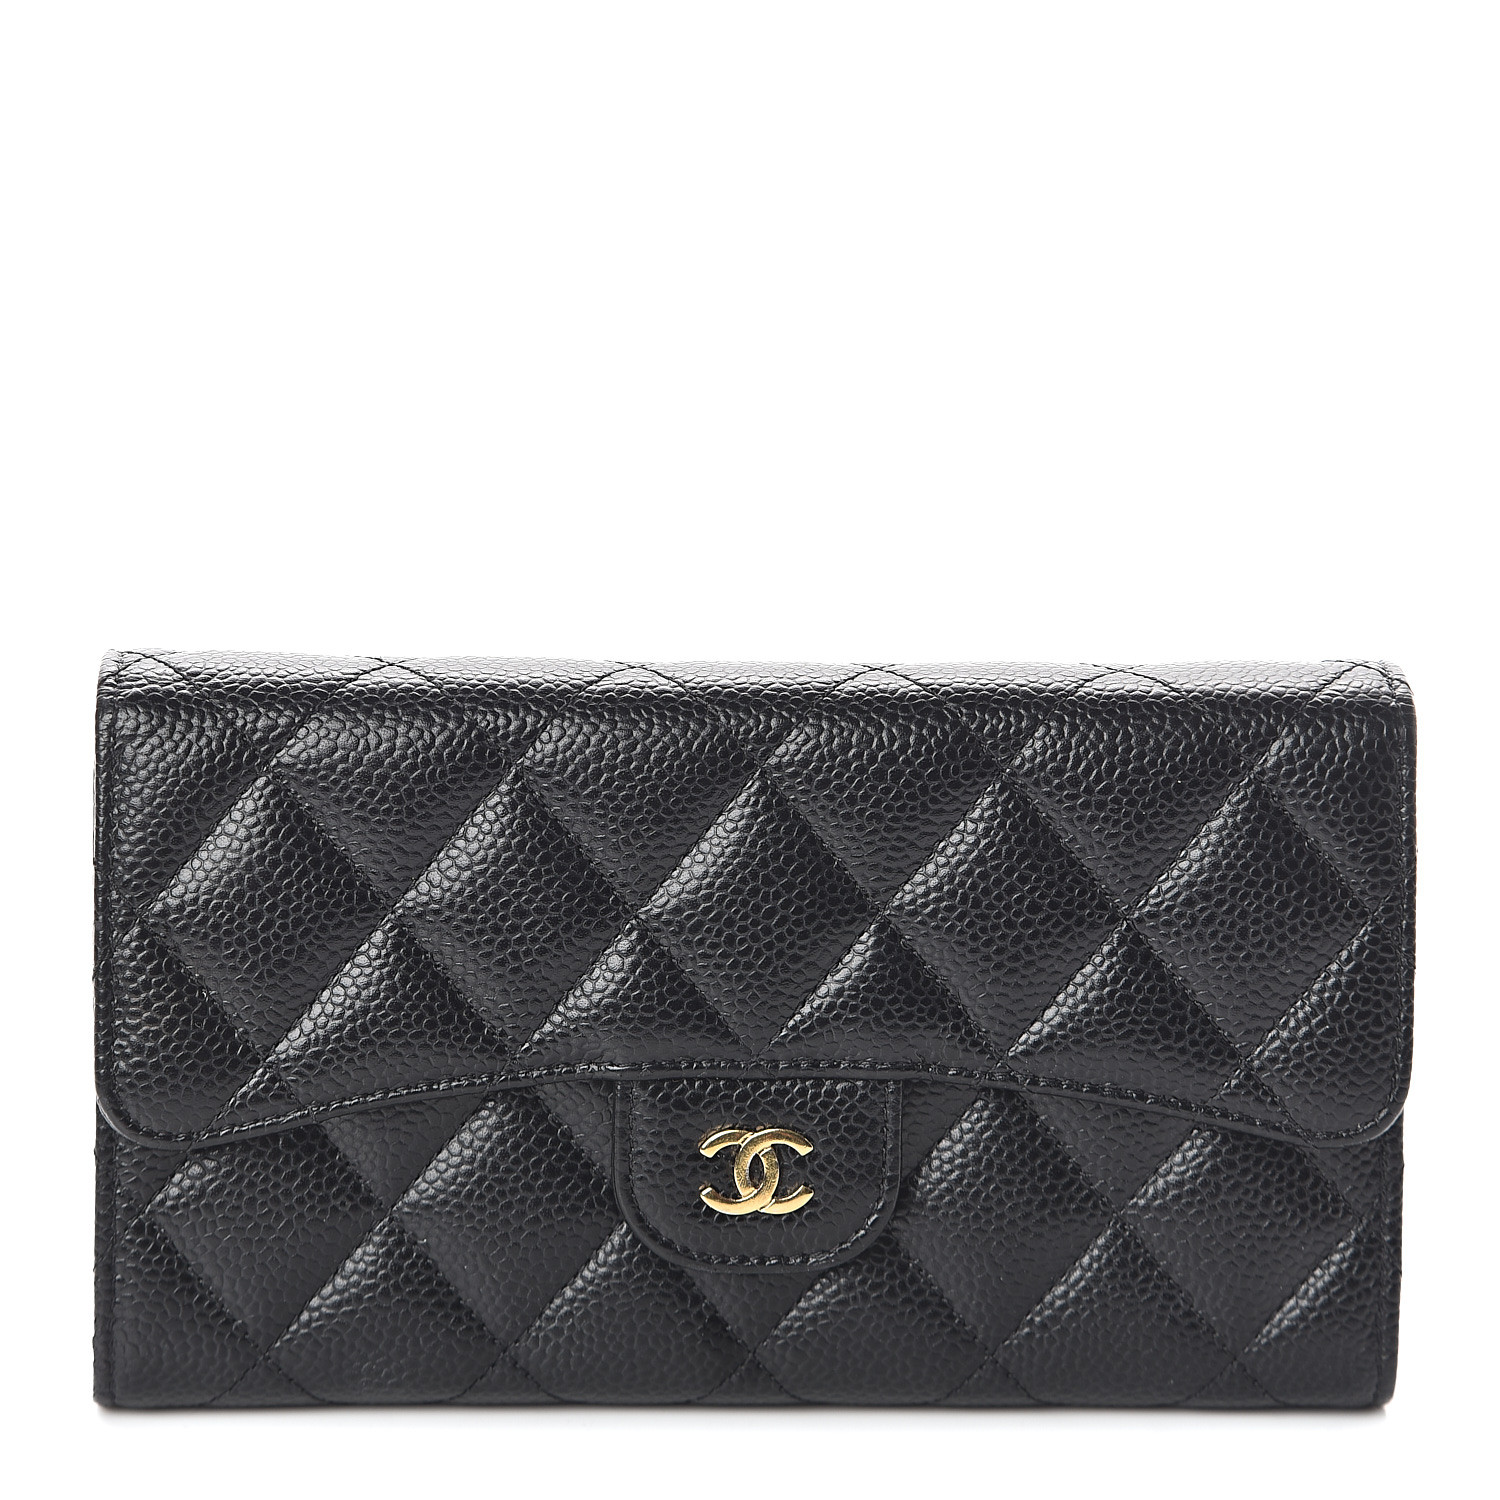 CHANEL Caviar Quilted Long Flap Wallet Black 542057